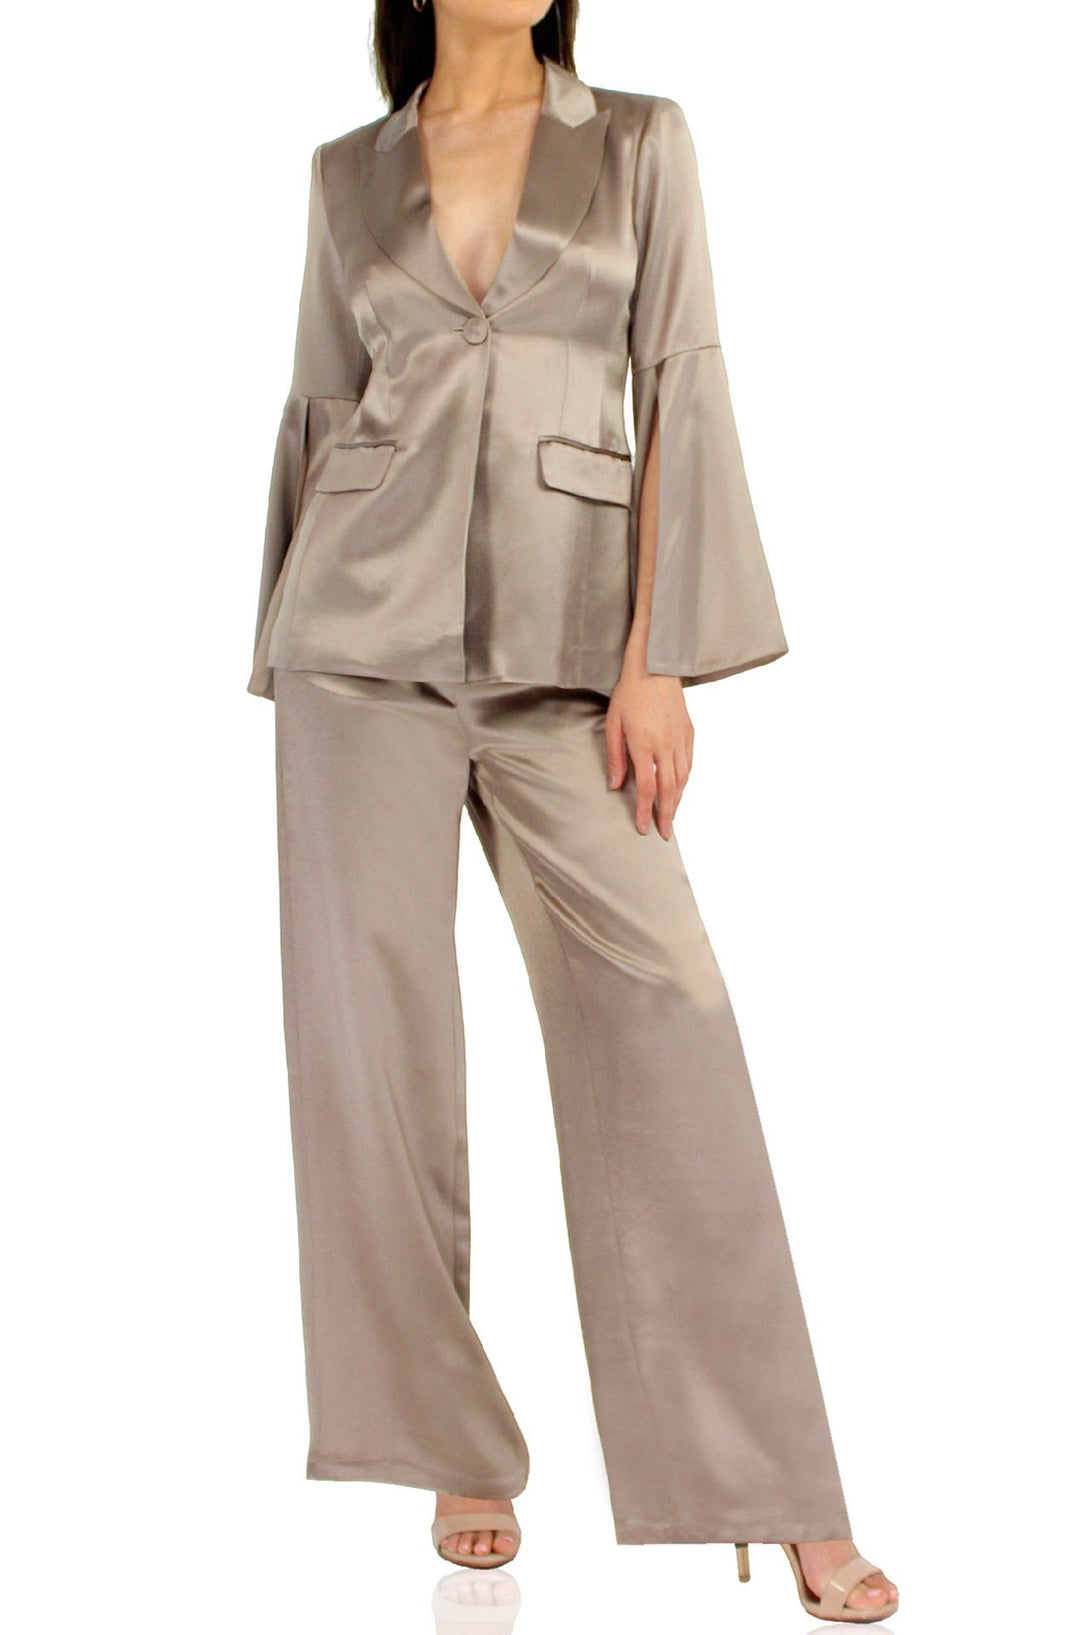 Womens-Designer-Straight-Fit-Pants-By-Kyle-Richards